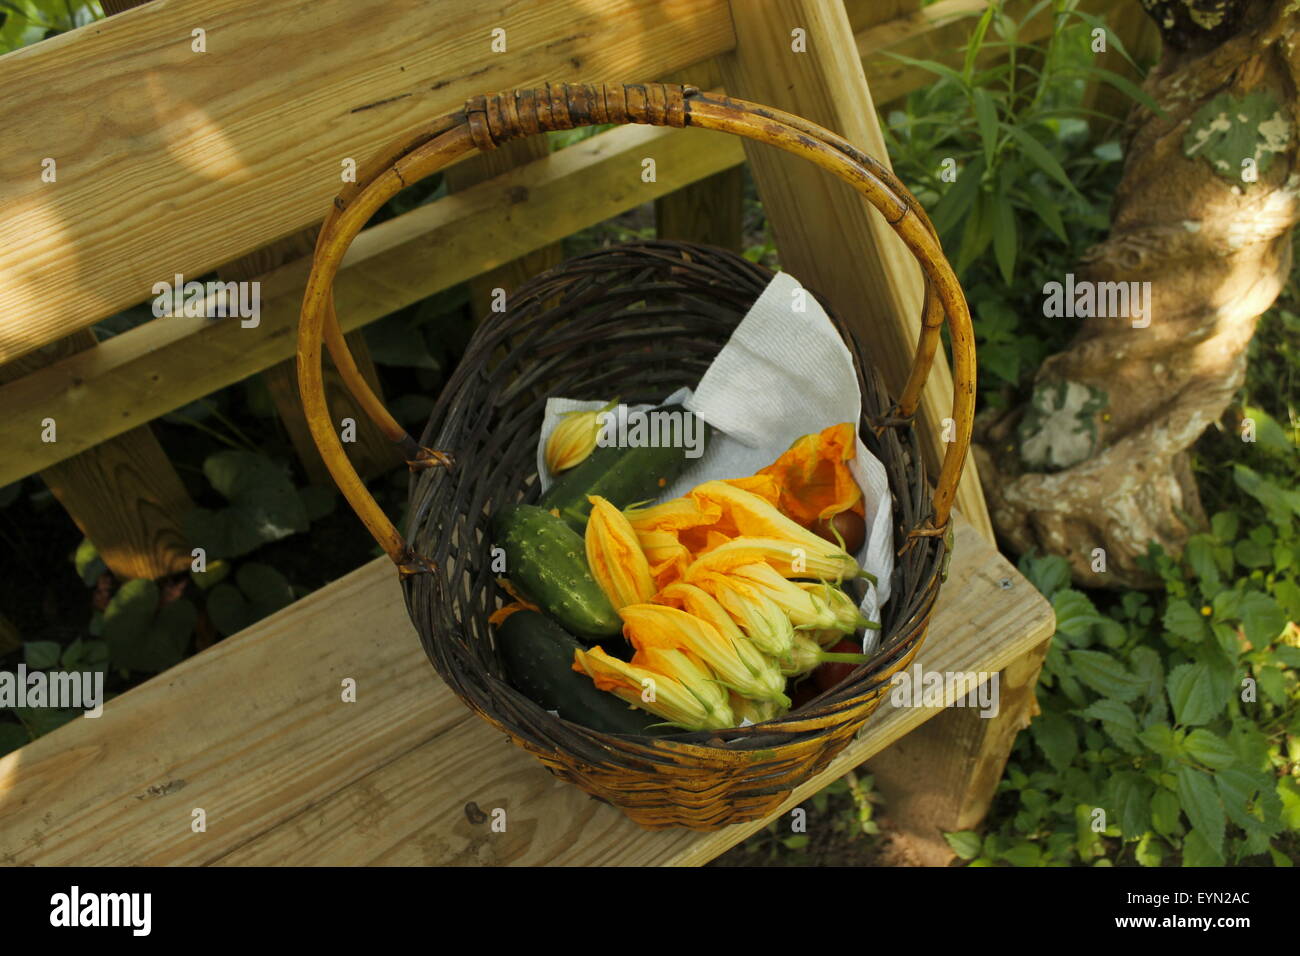 A wicker basket on a garden bench containing freshly picked vegetables Stock Photo